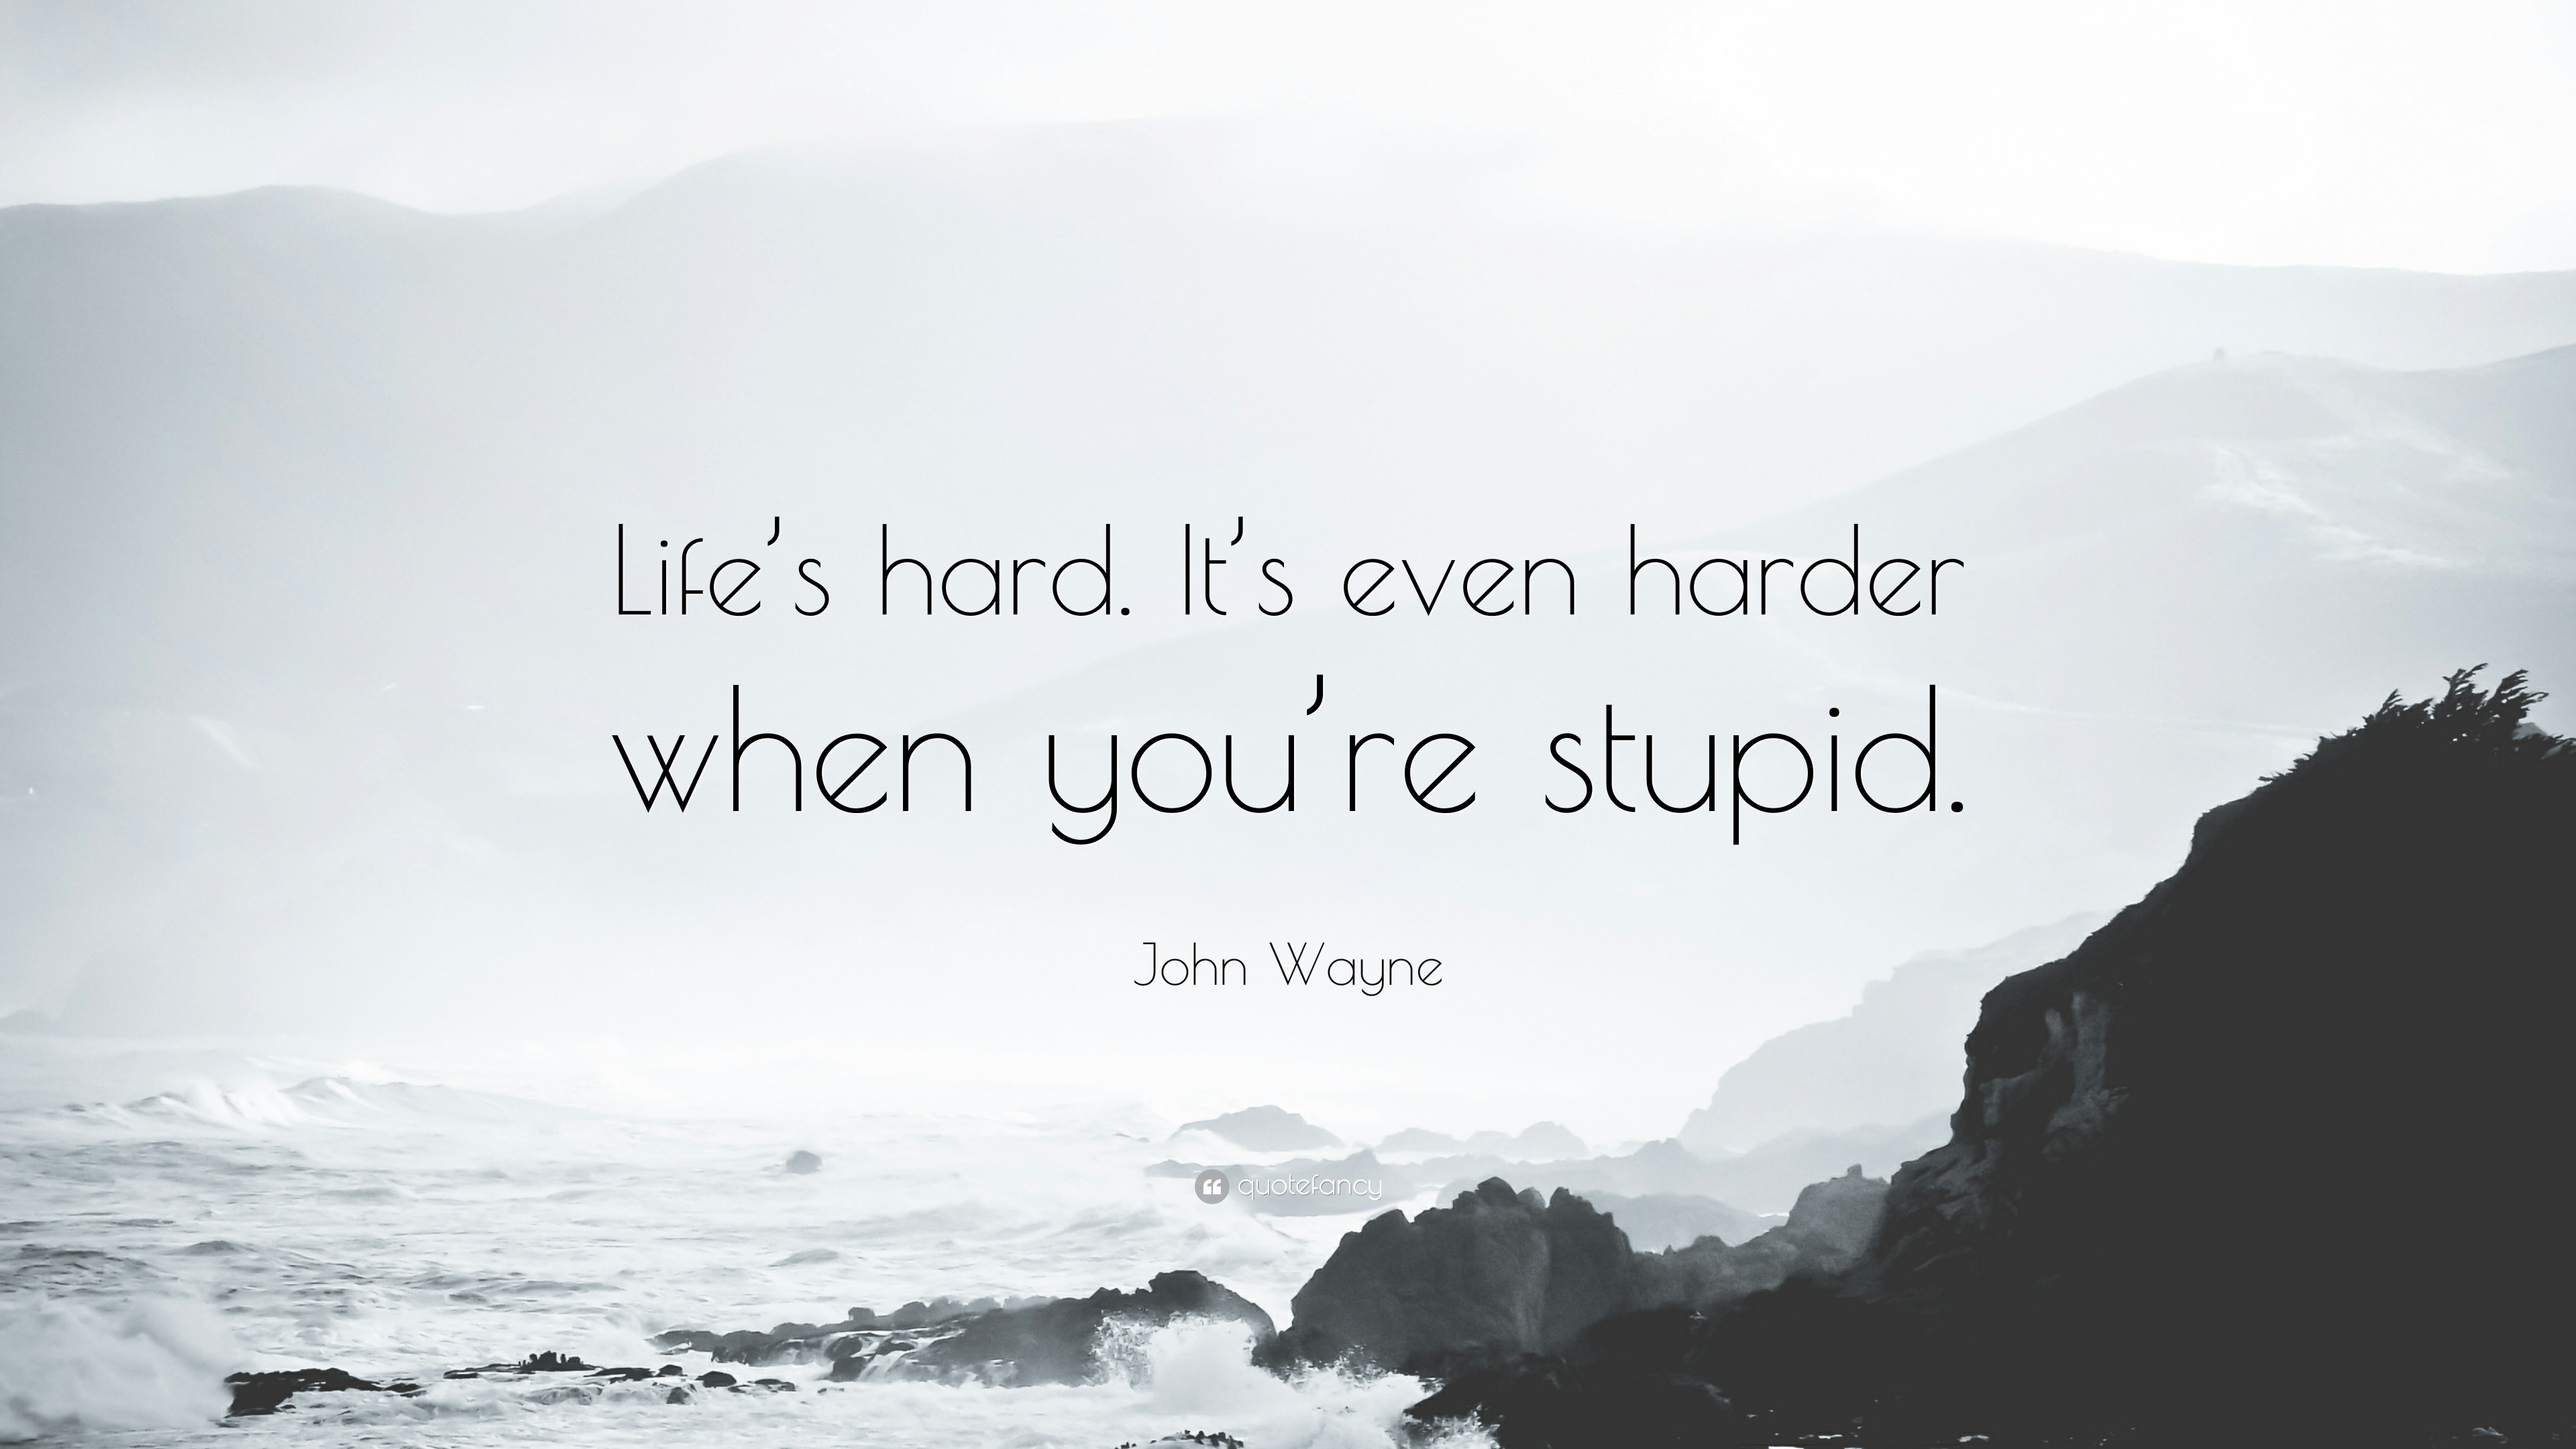 John Wayne Quote Life S Hard It S Even Harder When You Re Stupid 15 Wallpapers Quotefancy